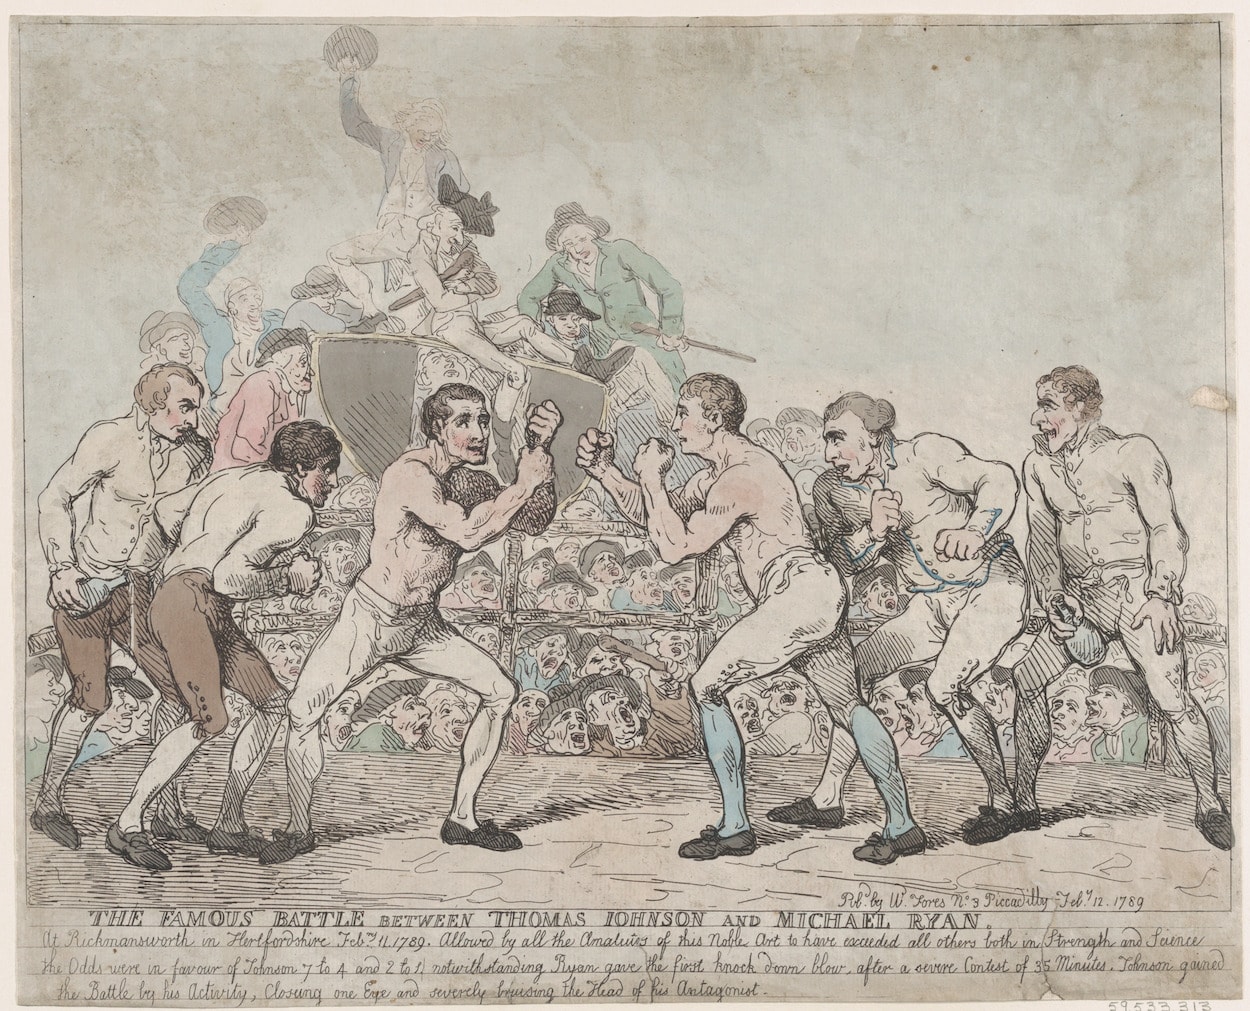 The Famous Battle Between Thomas Johnson and Michael Ryan, 1789, February 11, Various artists, The Metropolitan Museum of Art (article on somatic therapy)